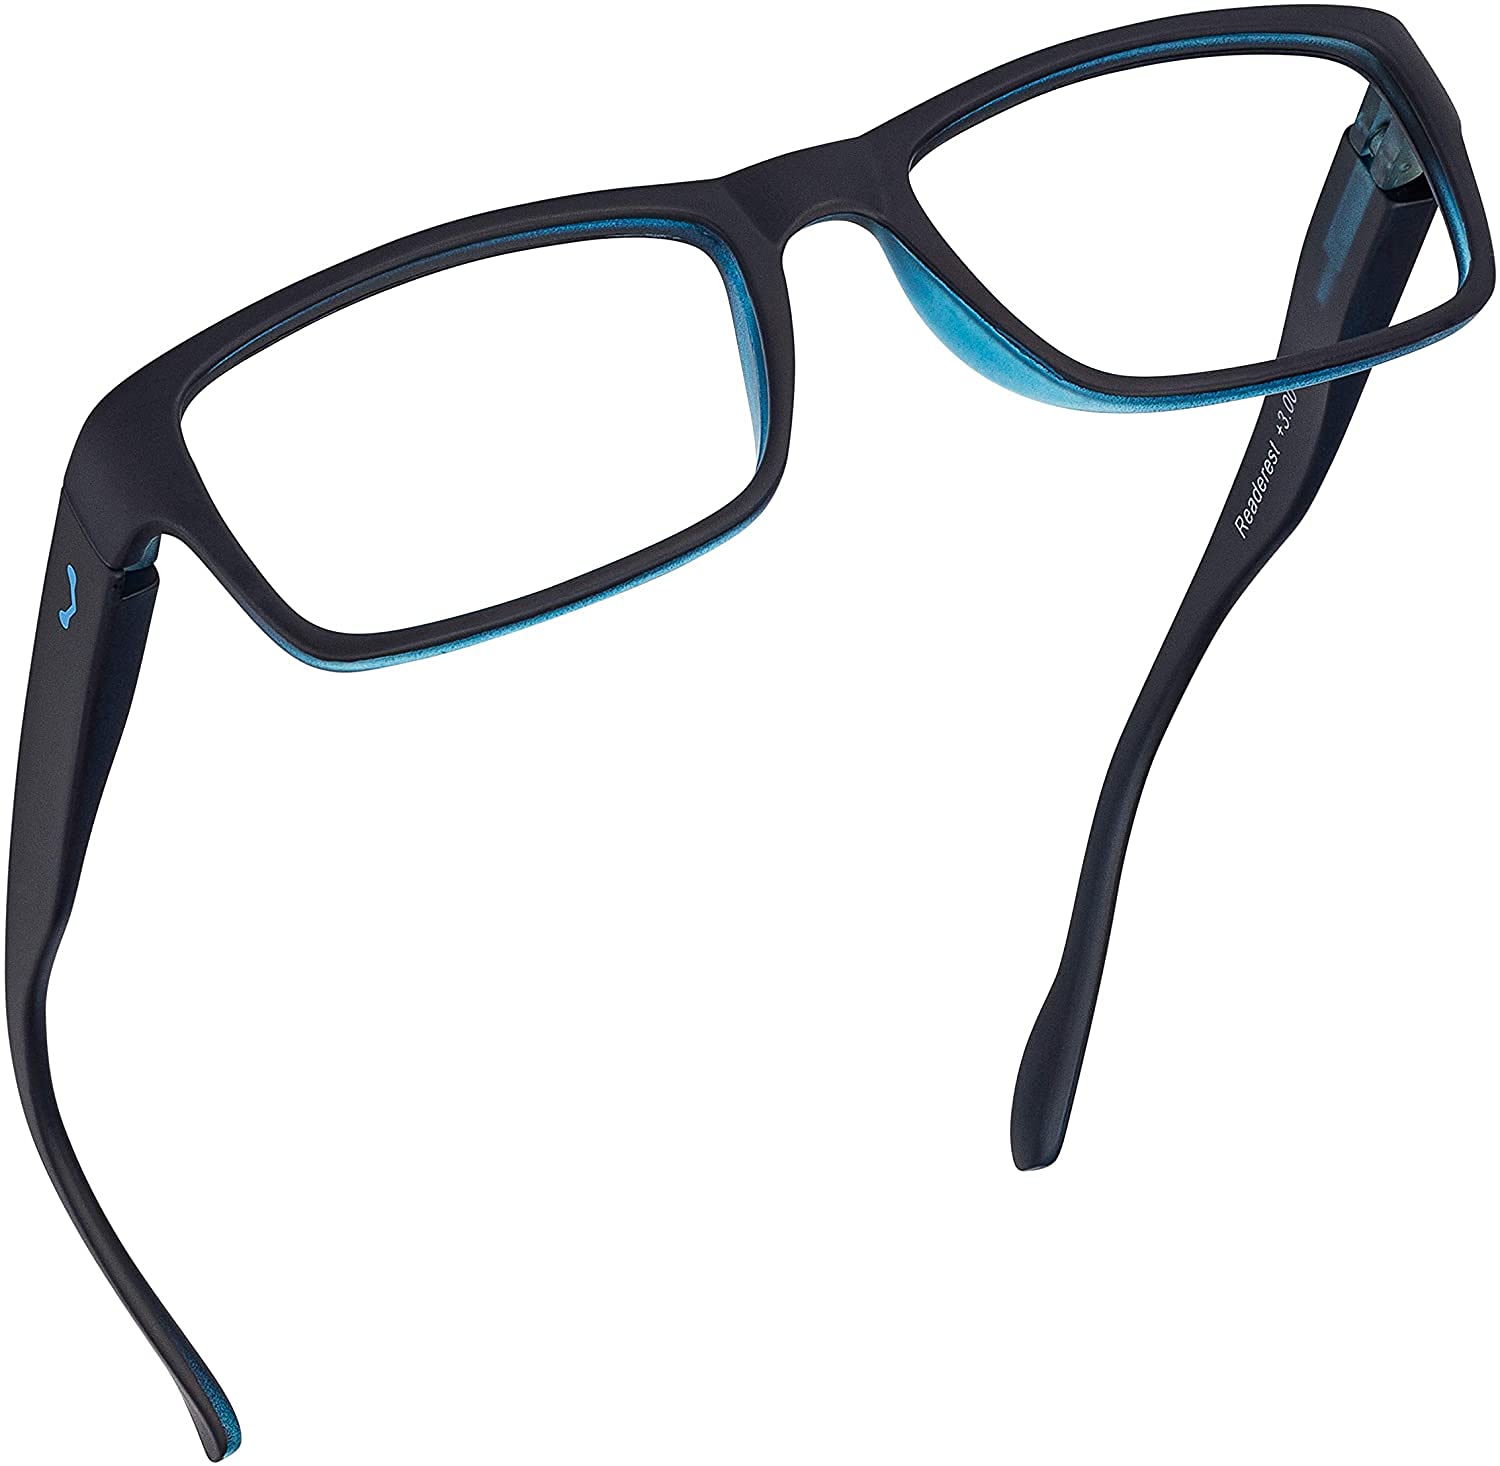 Readerest Blue Light Blocking Reading Glasses (Blue, 2.25 Magnification)  Computer Glasses, fashionable for men and women